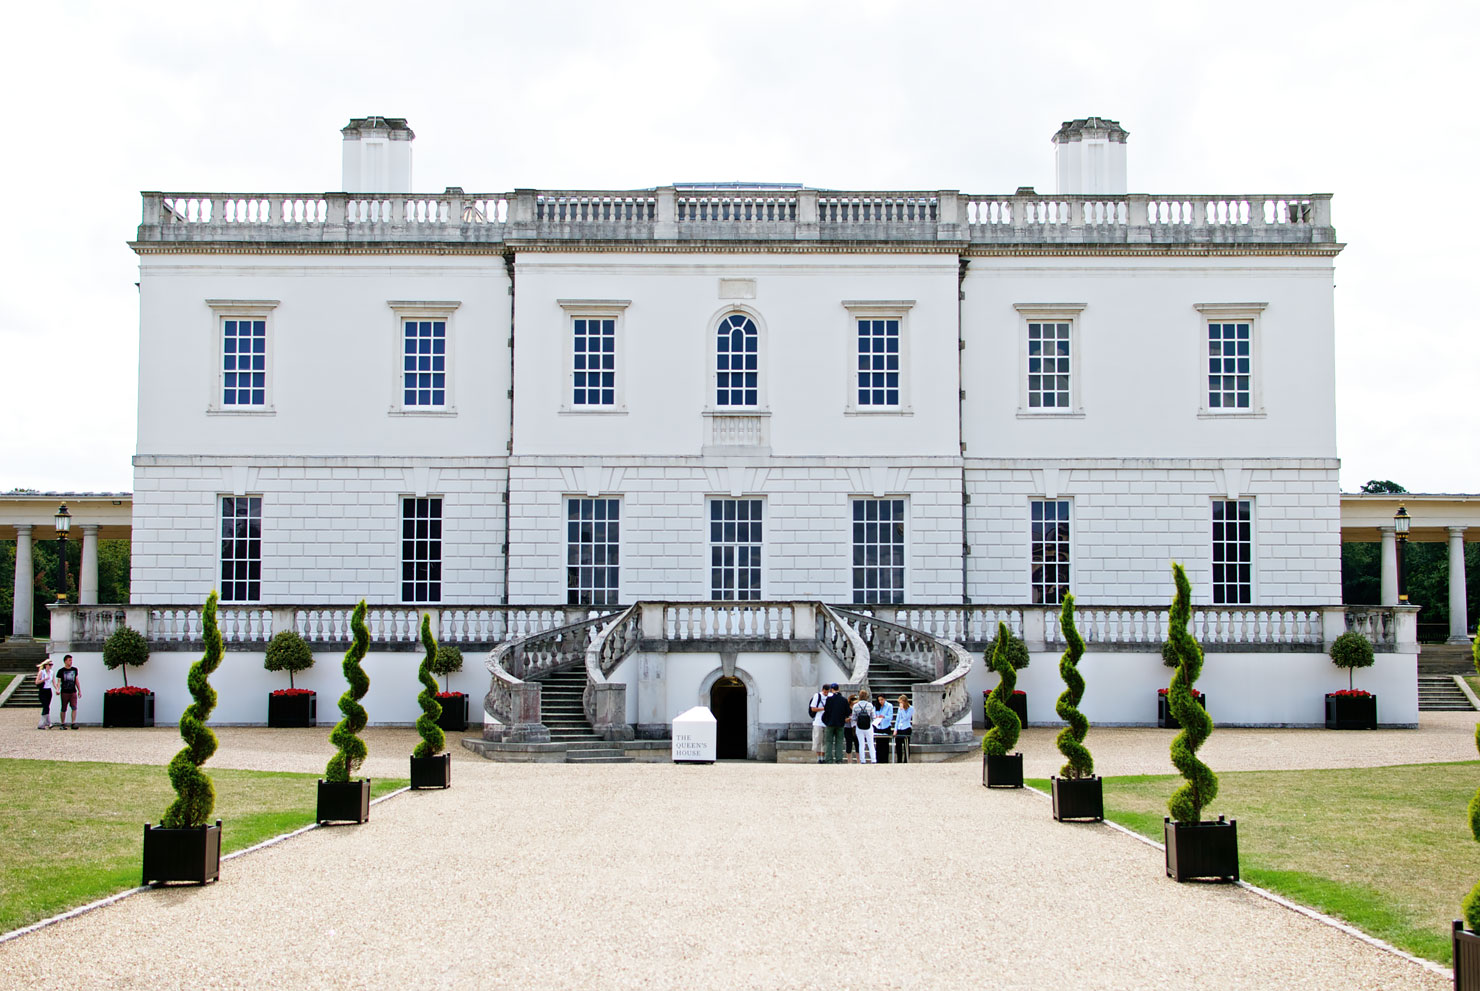 Classical design of Queen's House in Greenwich London.